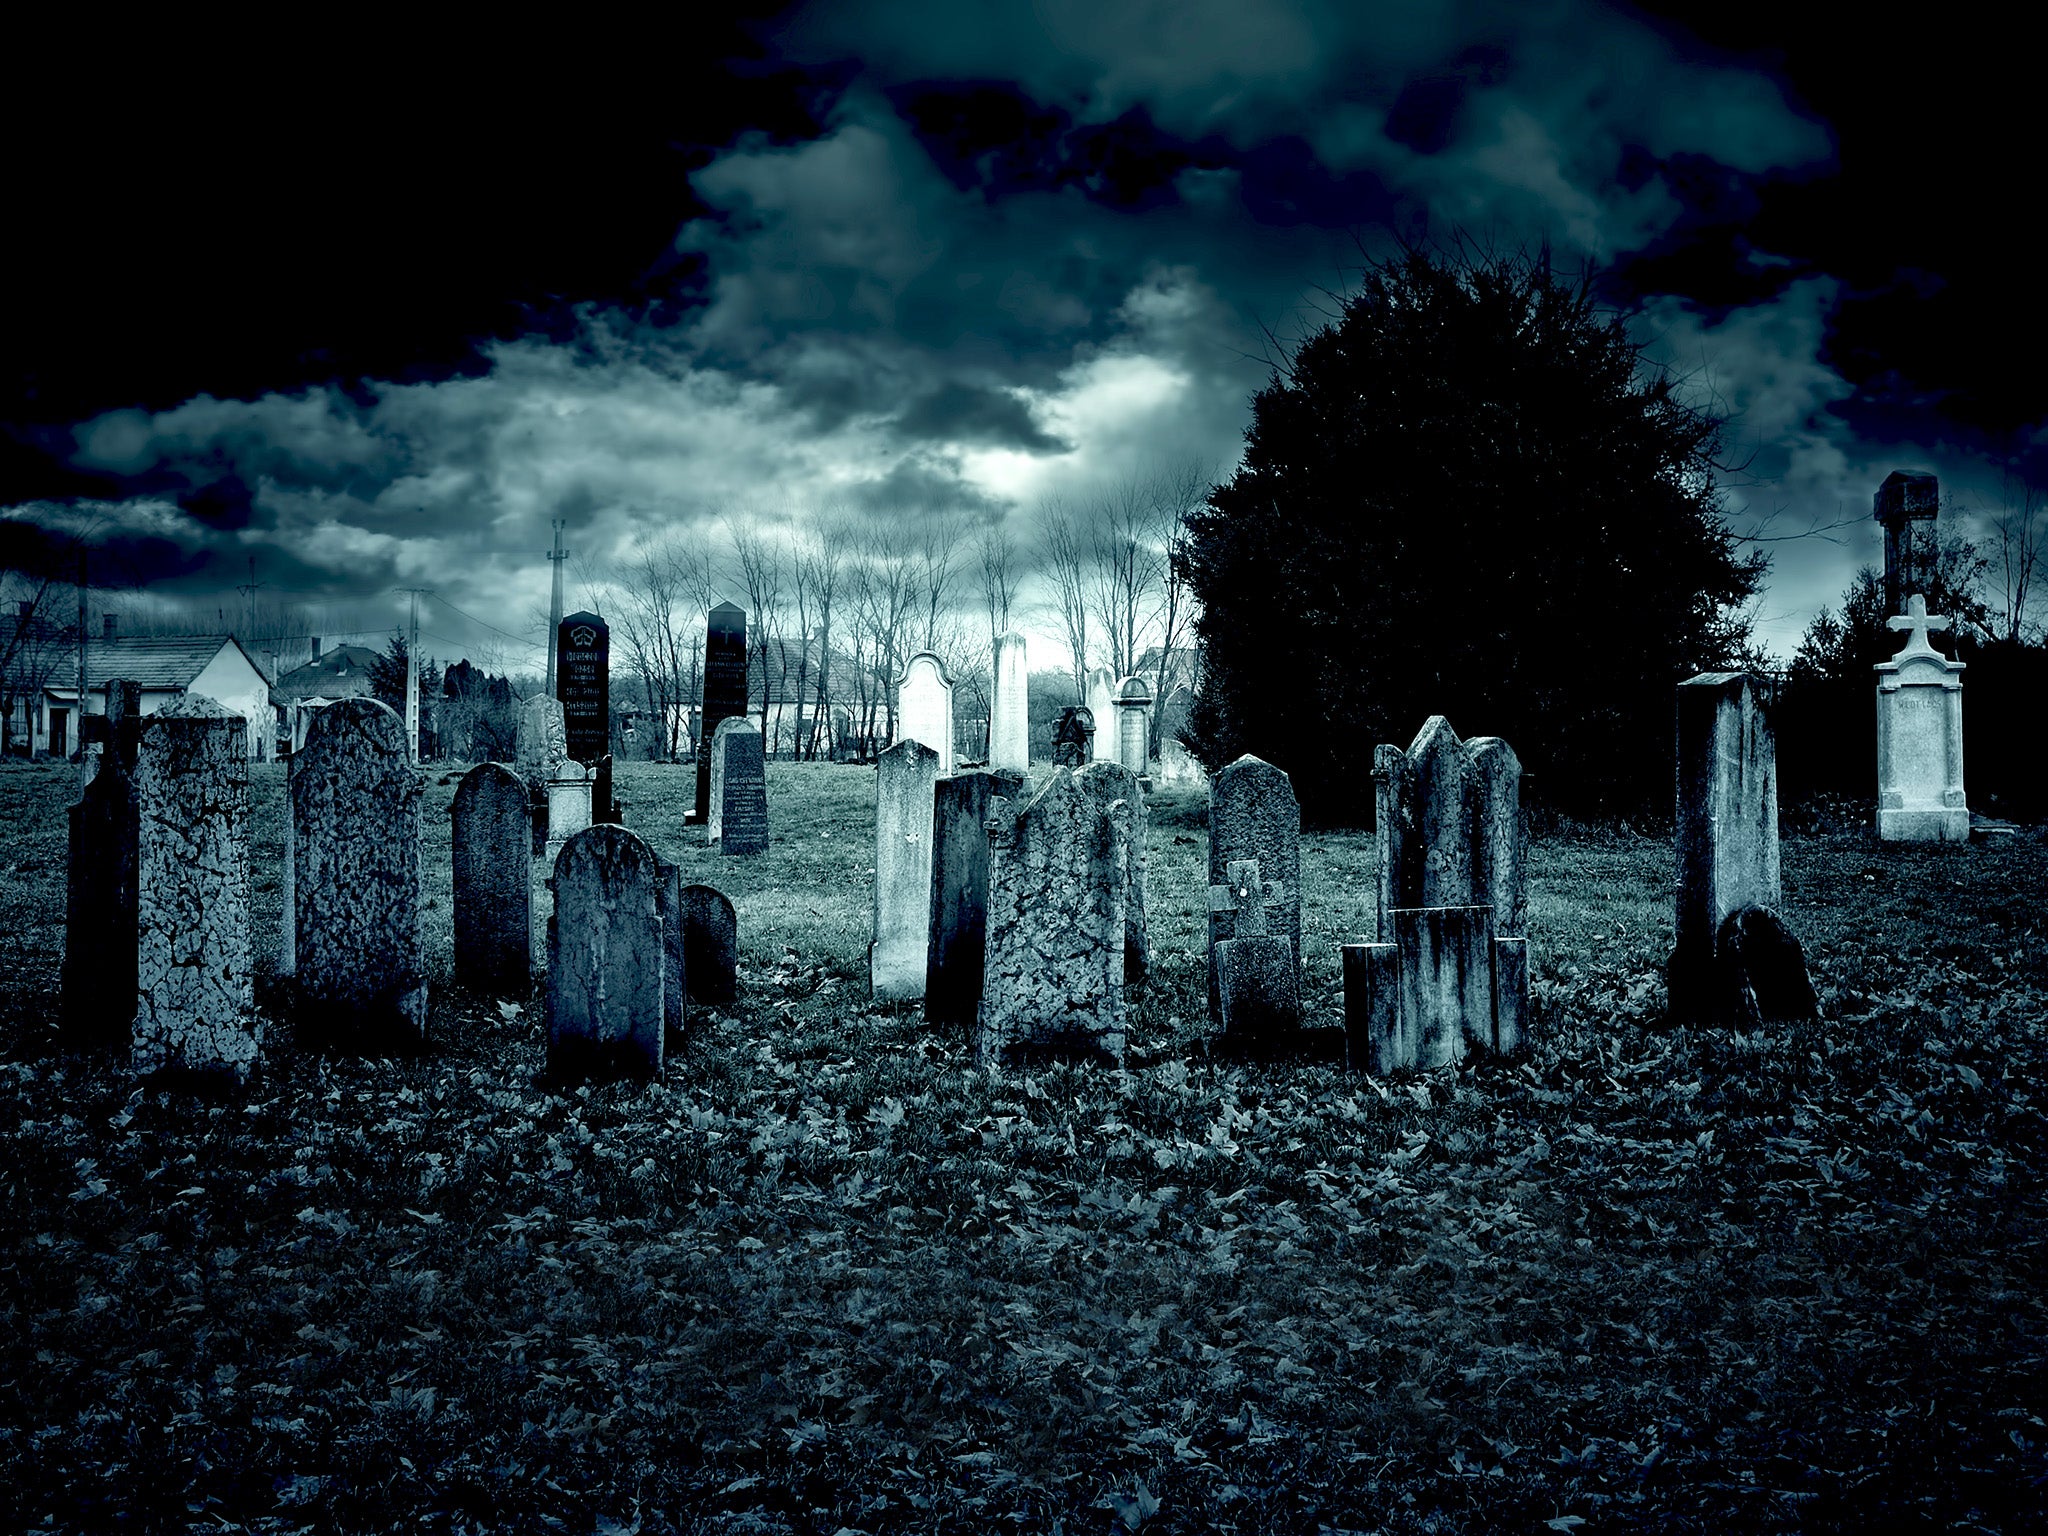 Burial in a cemetery could soon be a thing of the past